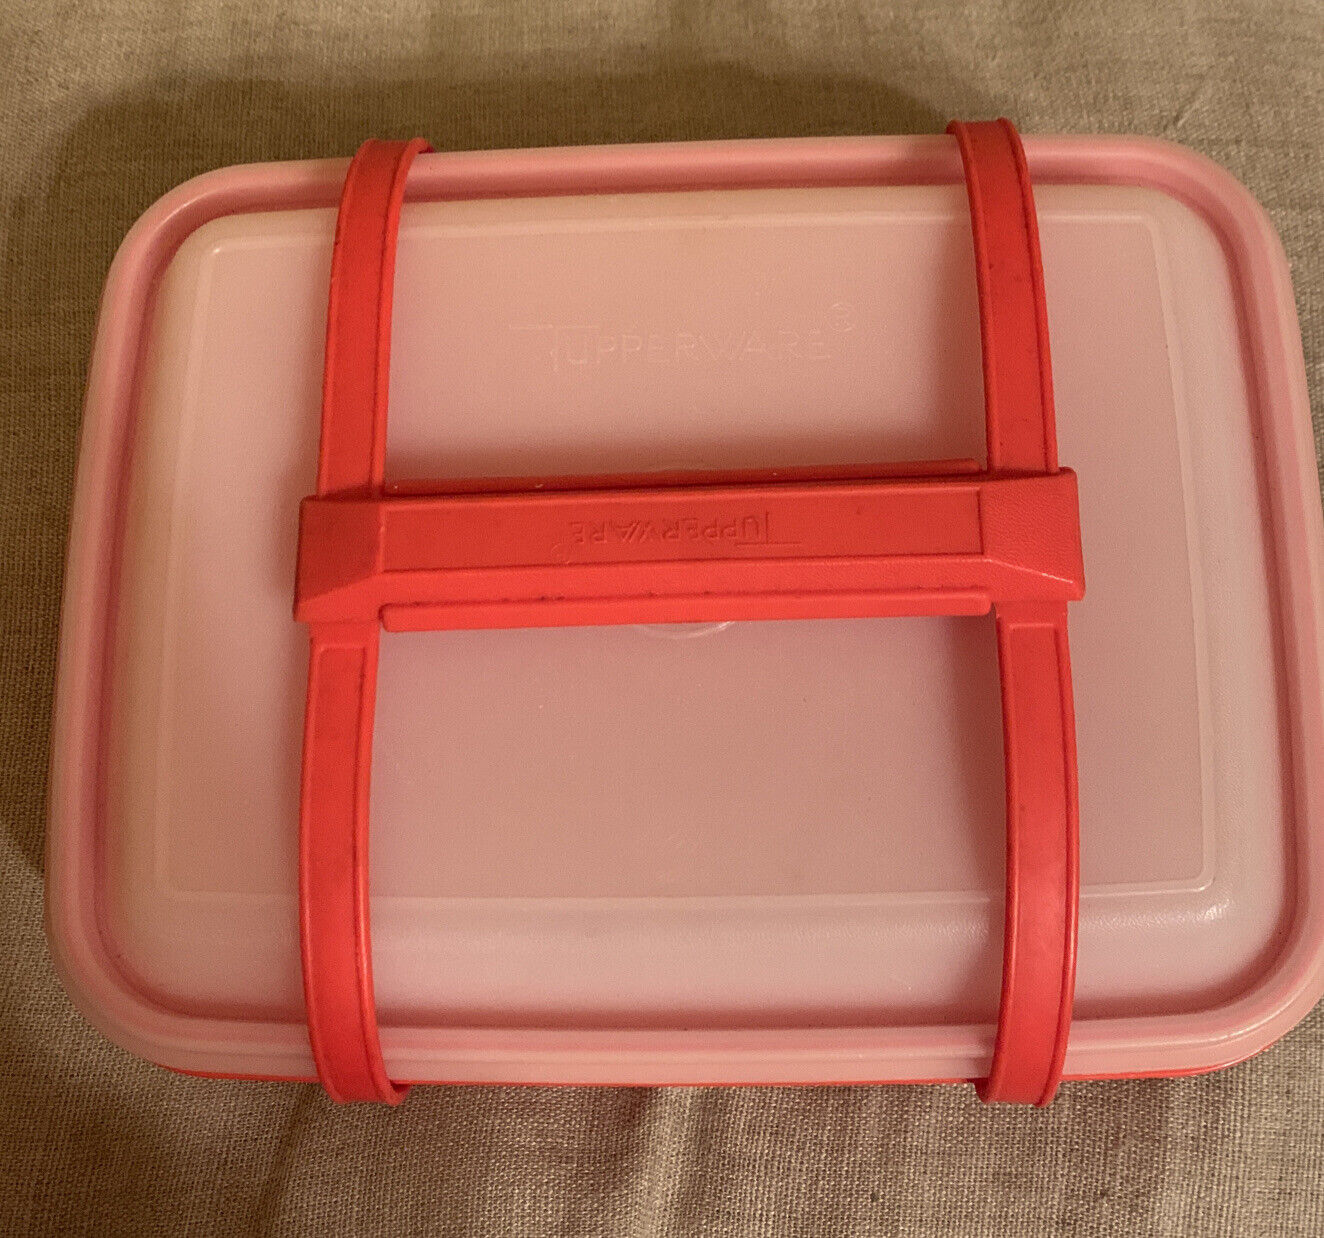 TUPPERWARE #1254-2 Pak N Carry Lunch Box,  3 Containers, Handle Paprika Orange